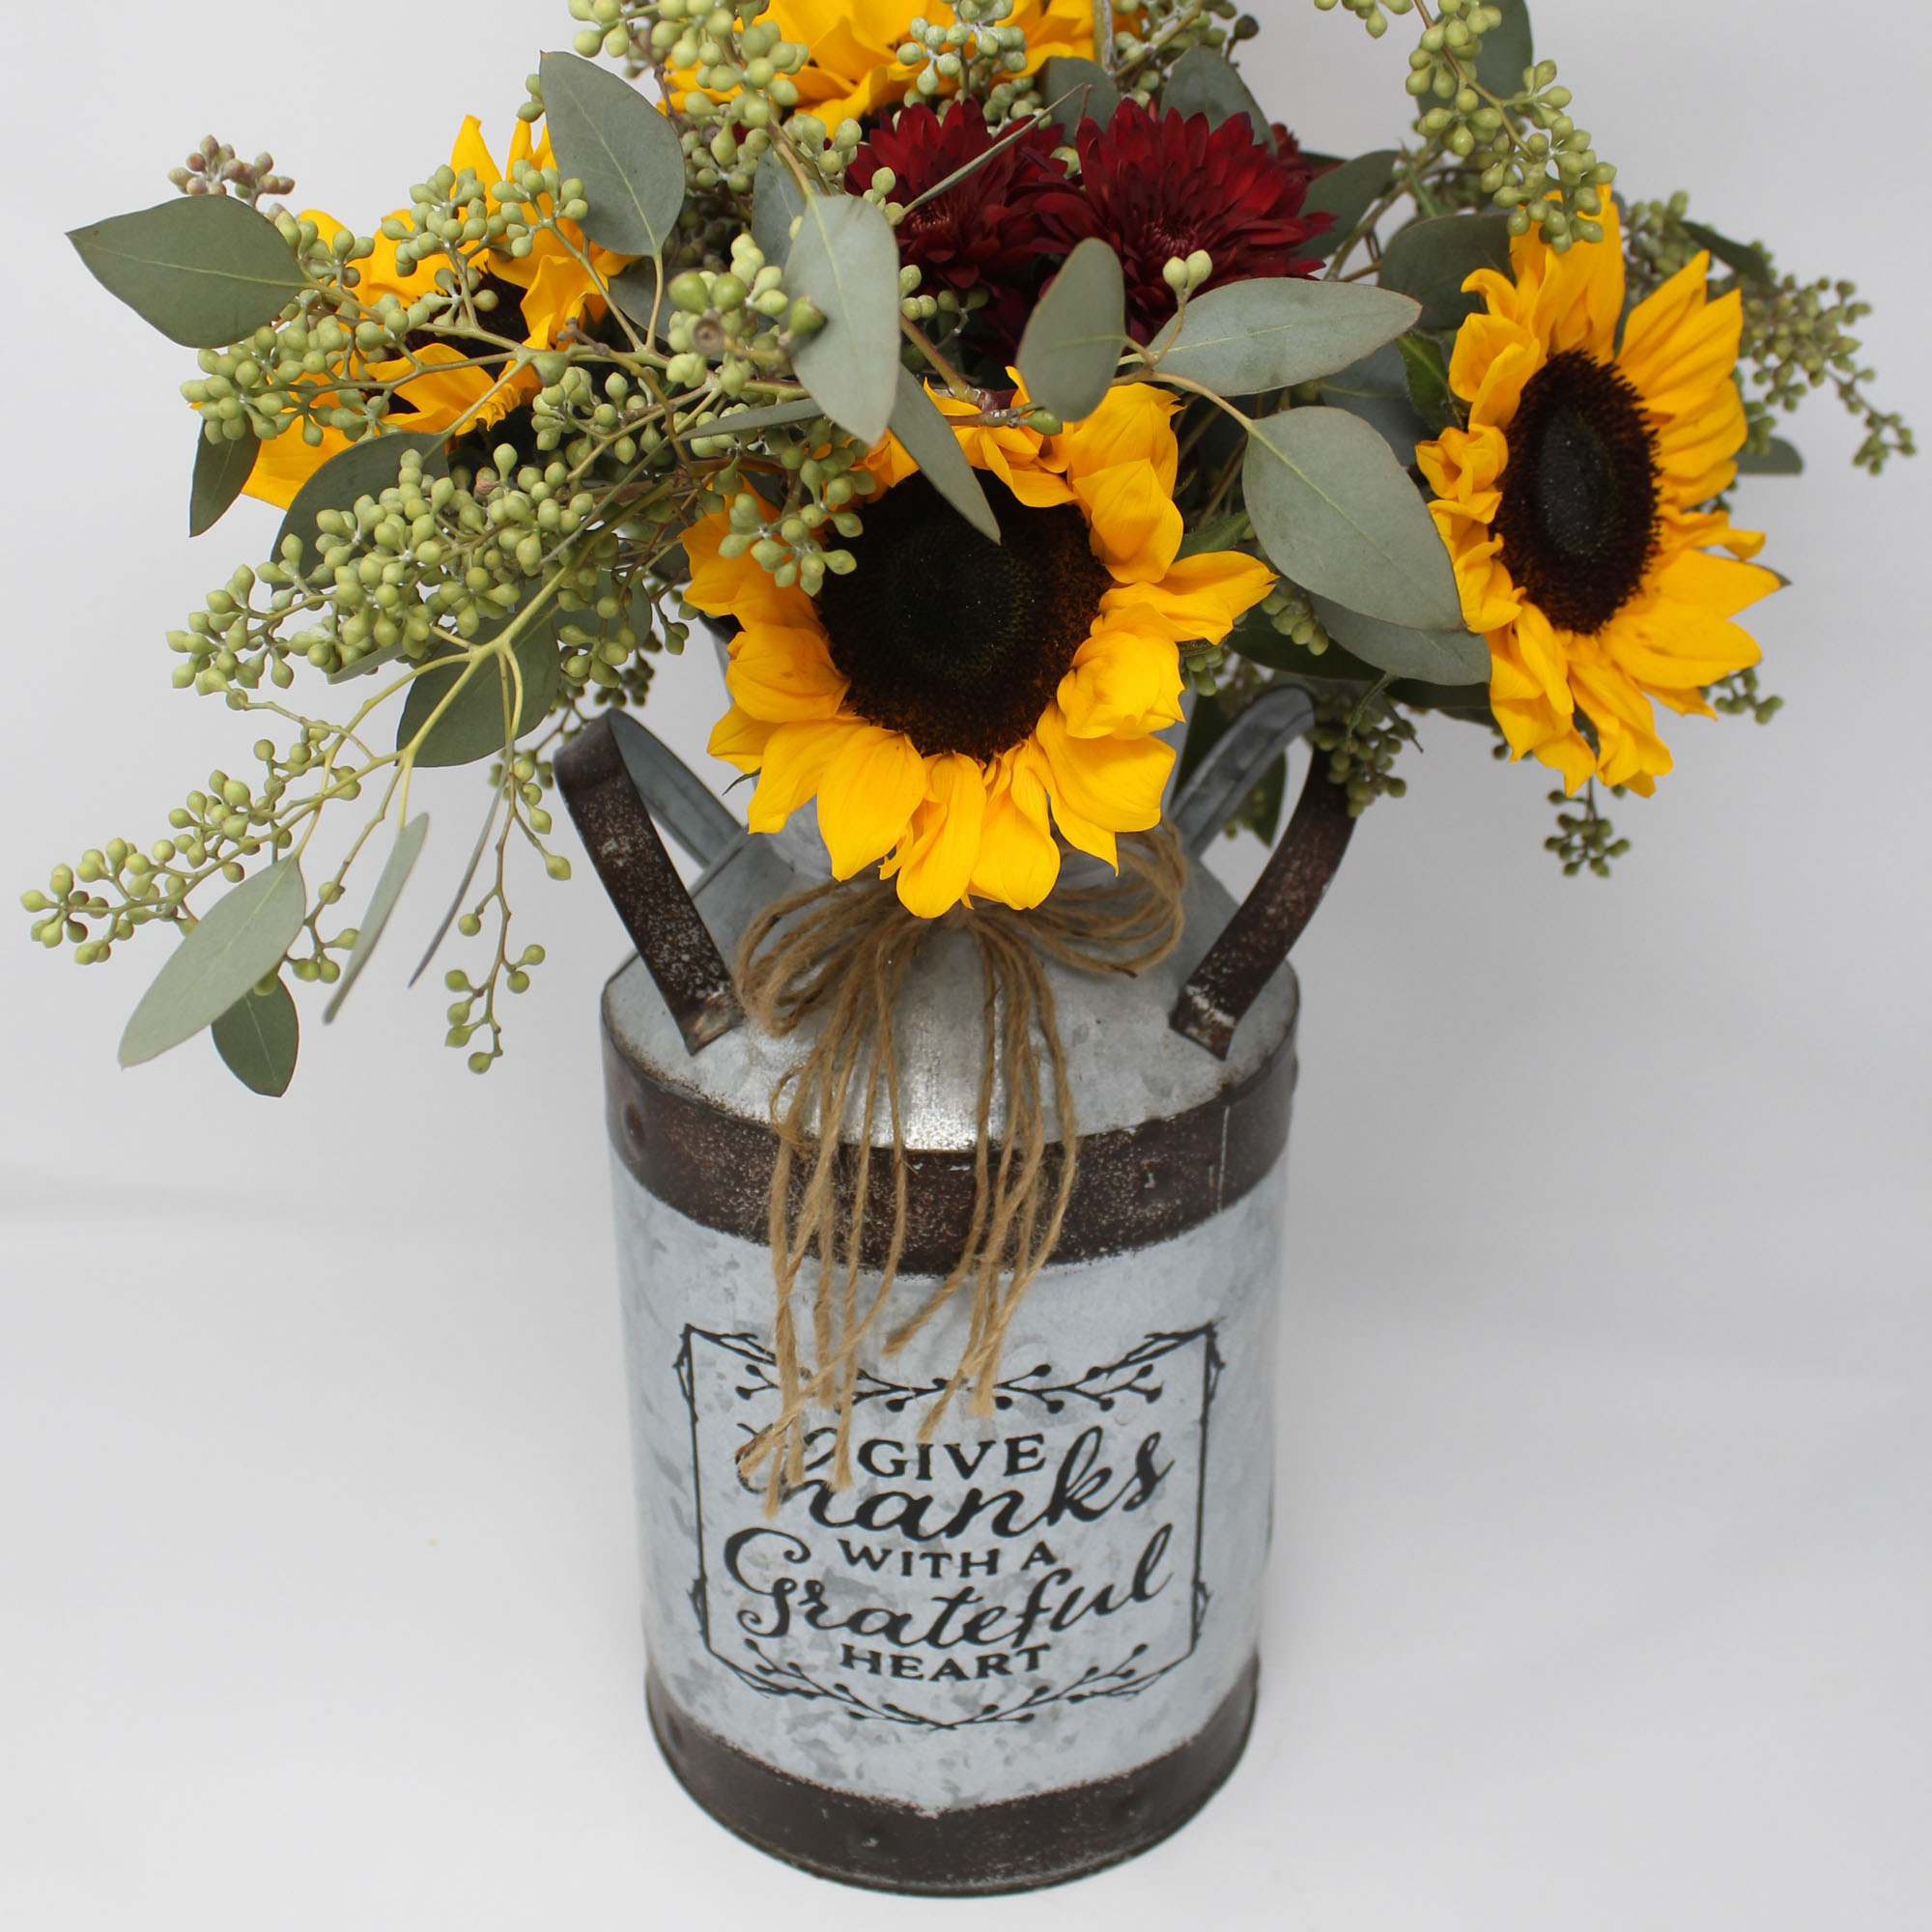 Photo of a floral arrangement with sunflowers and other plants, in a rustic container.